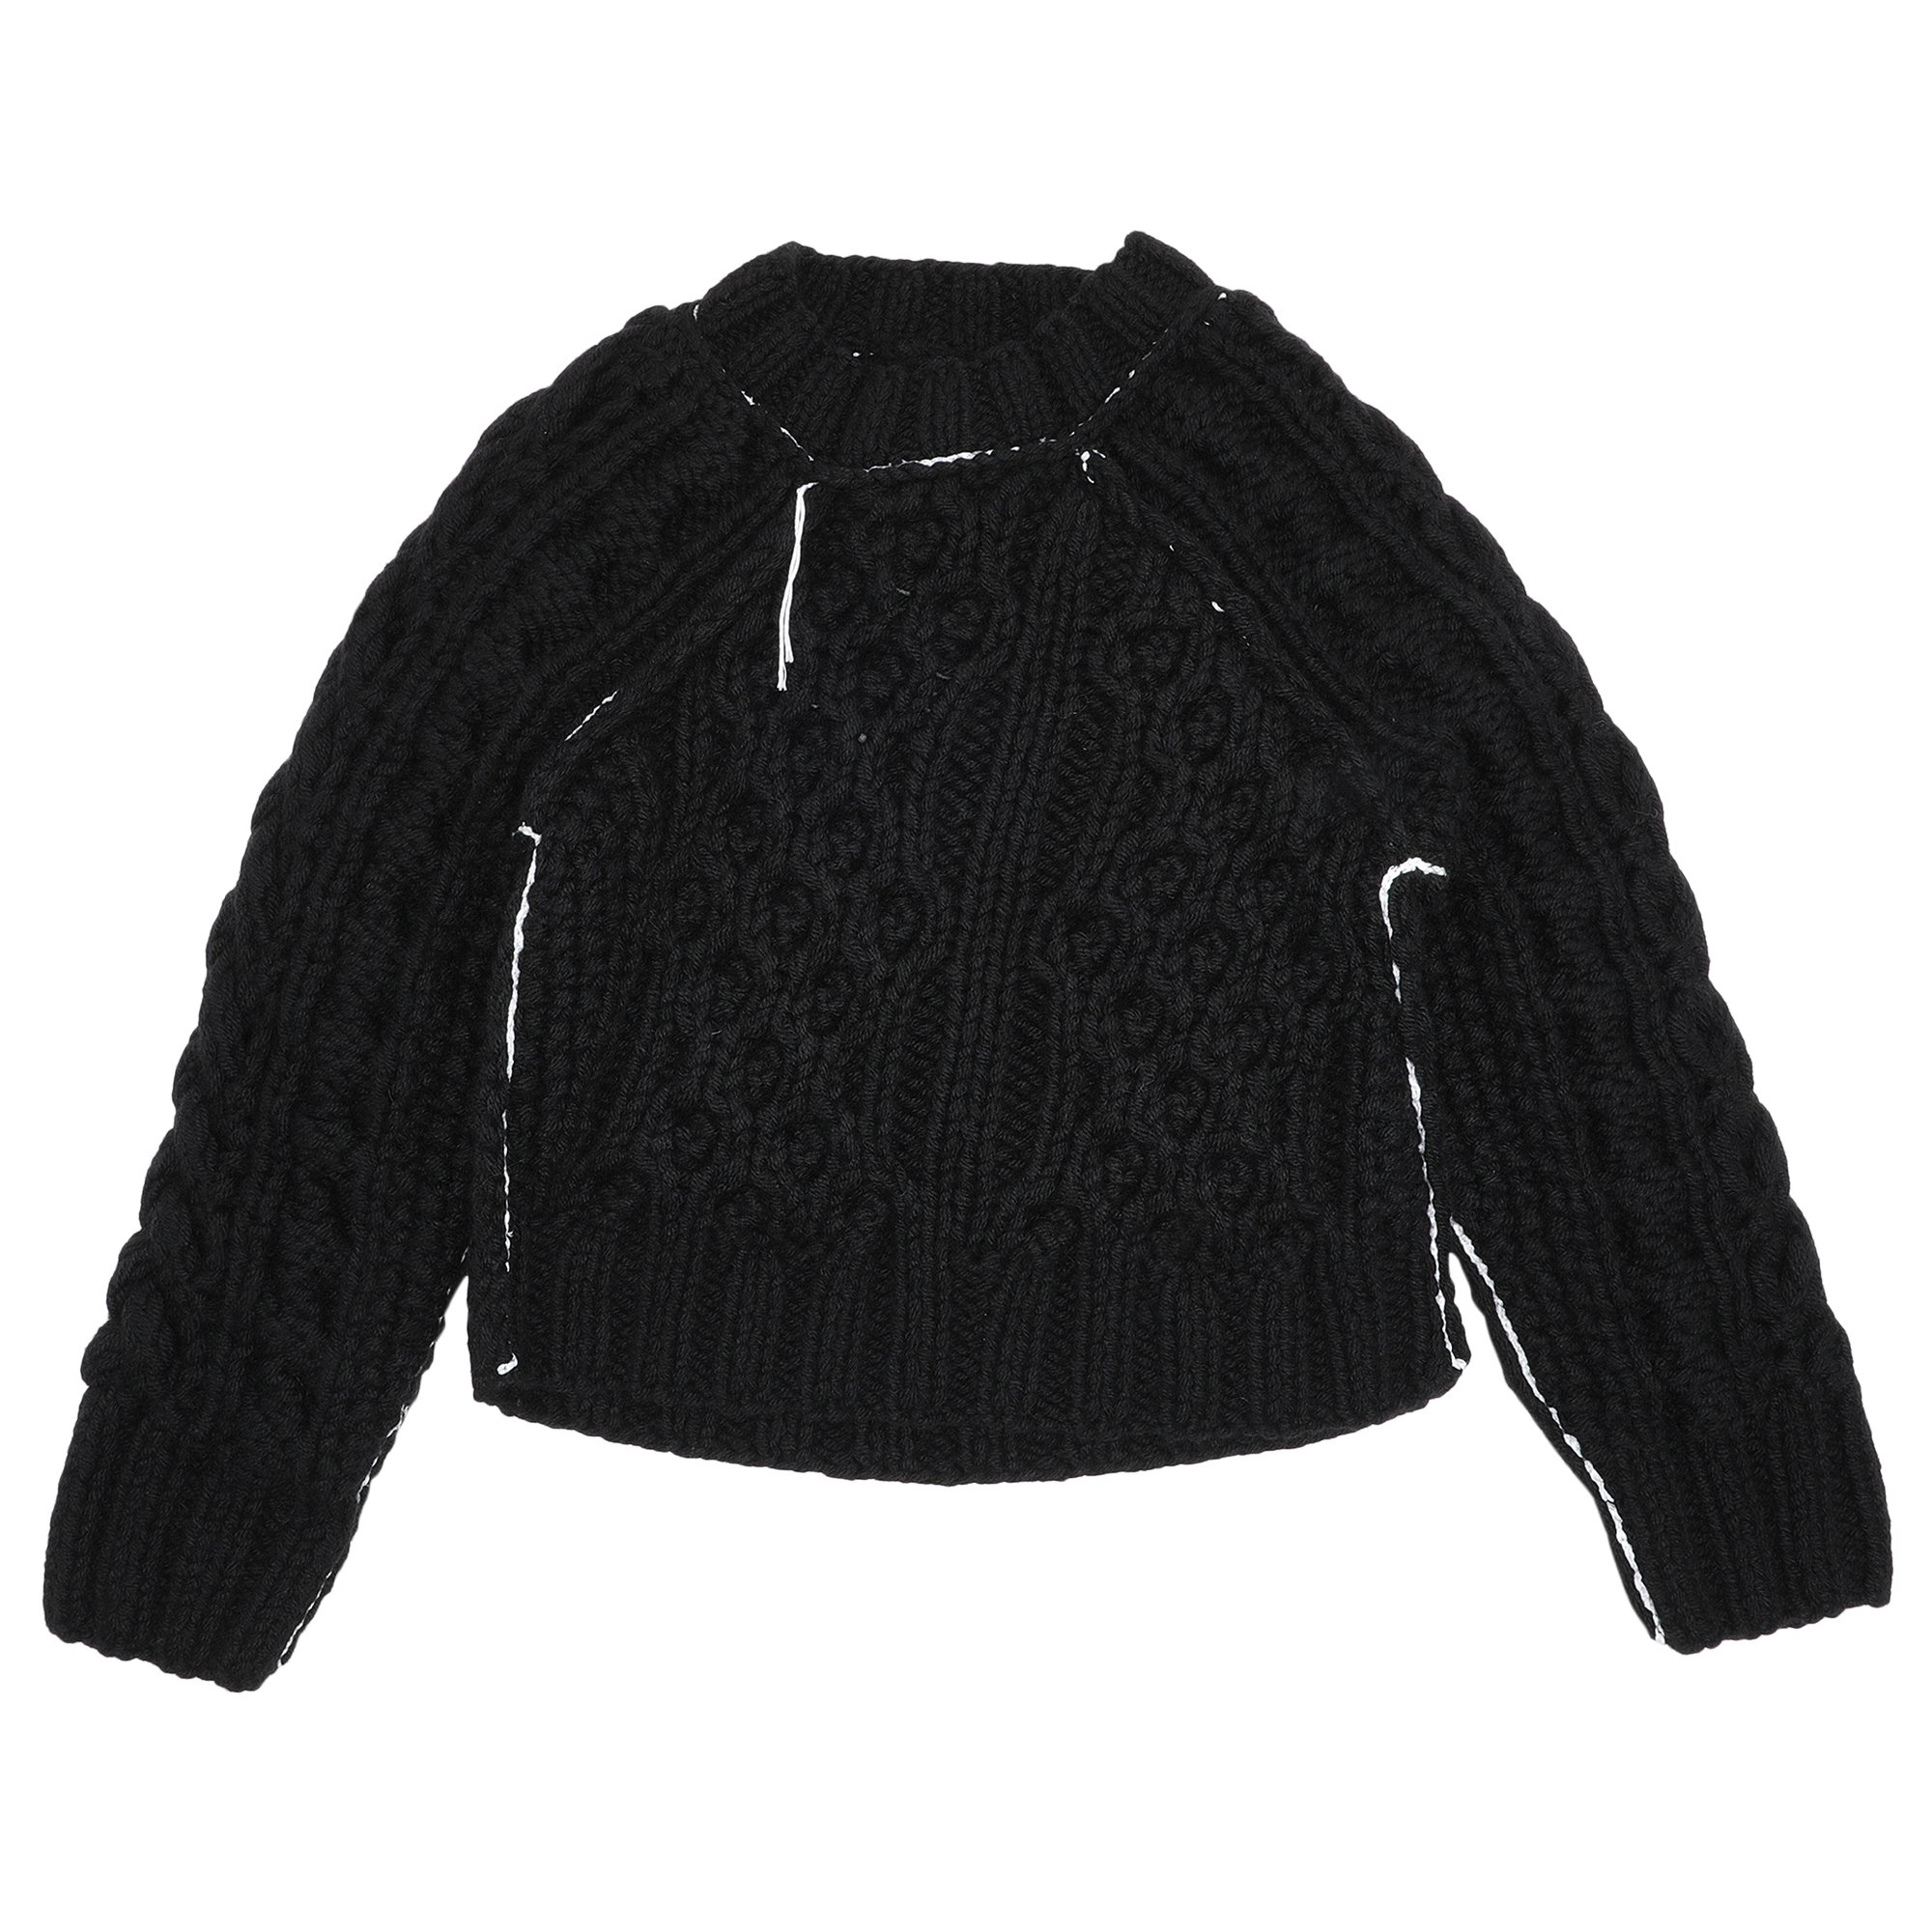 Buy MM6 Maison Margiela Chunky Cable Knit Sweater 'Black 